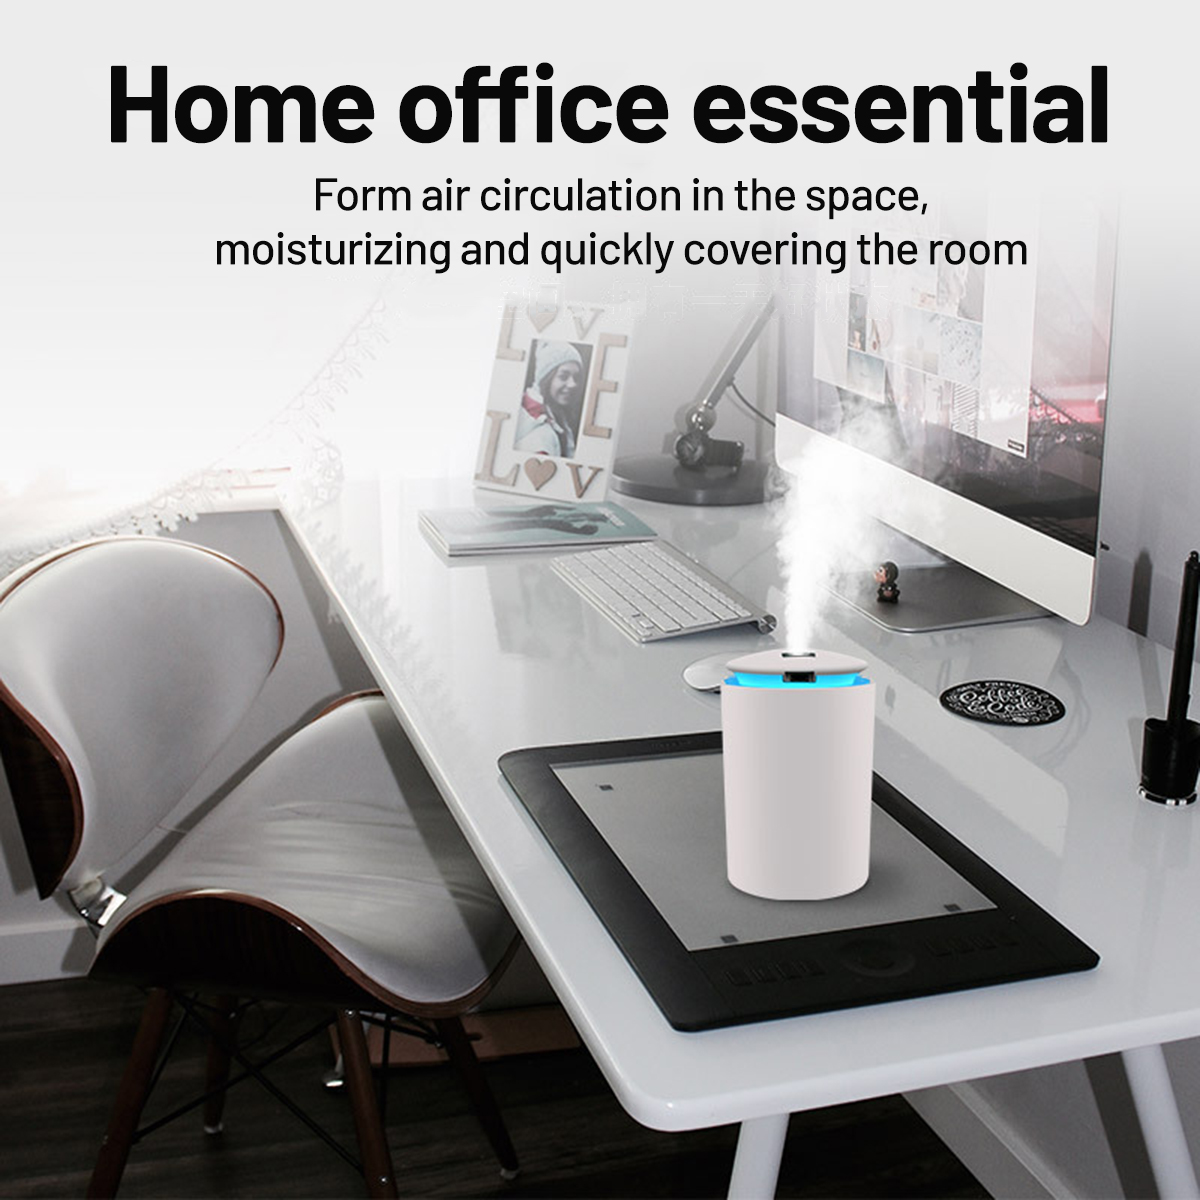 260ml-5V-Mini-Air-Humidifier-Night-Light-Portable-USB-Charging-Mute-Touch-Dustproof-for-Home-Office--1758526-2